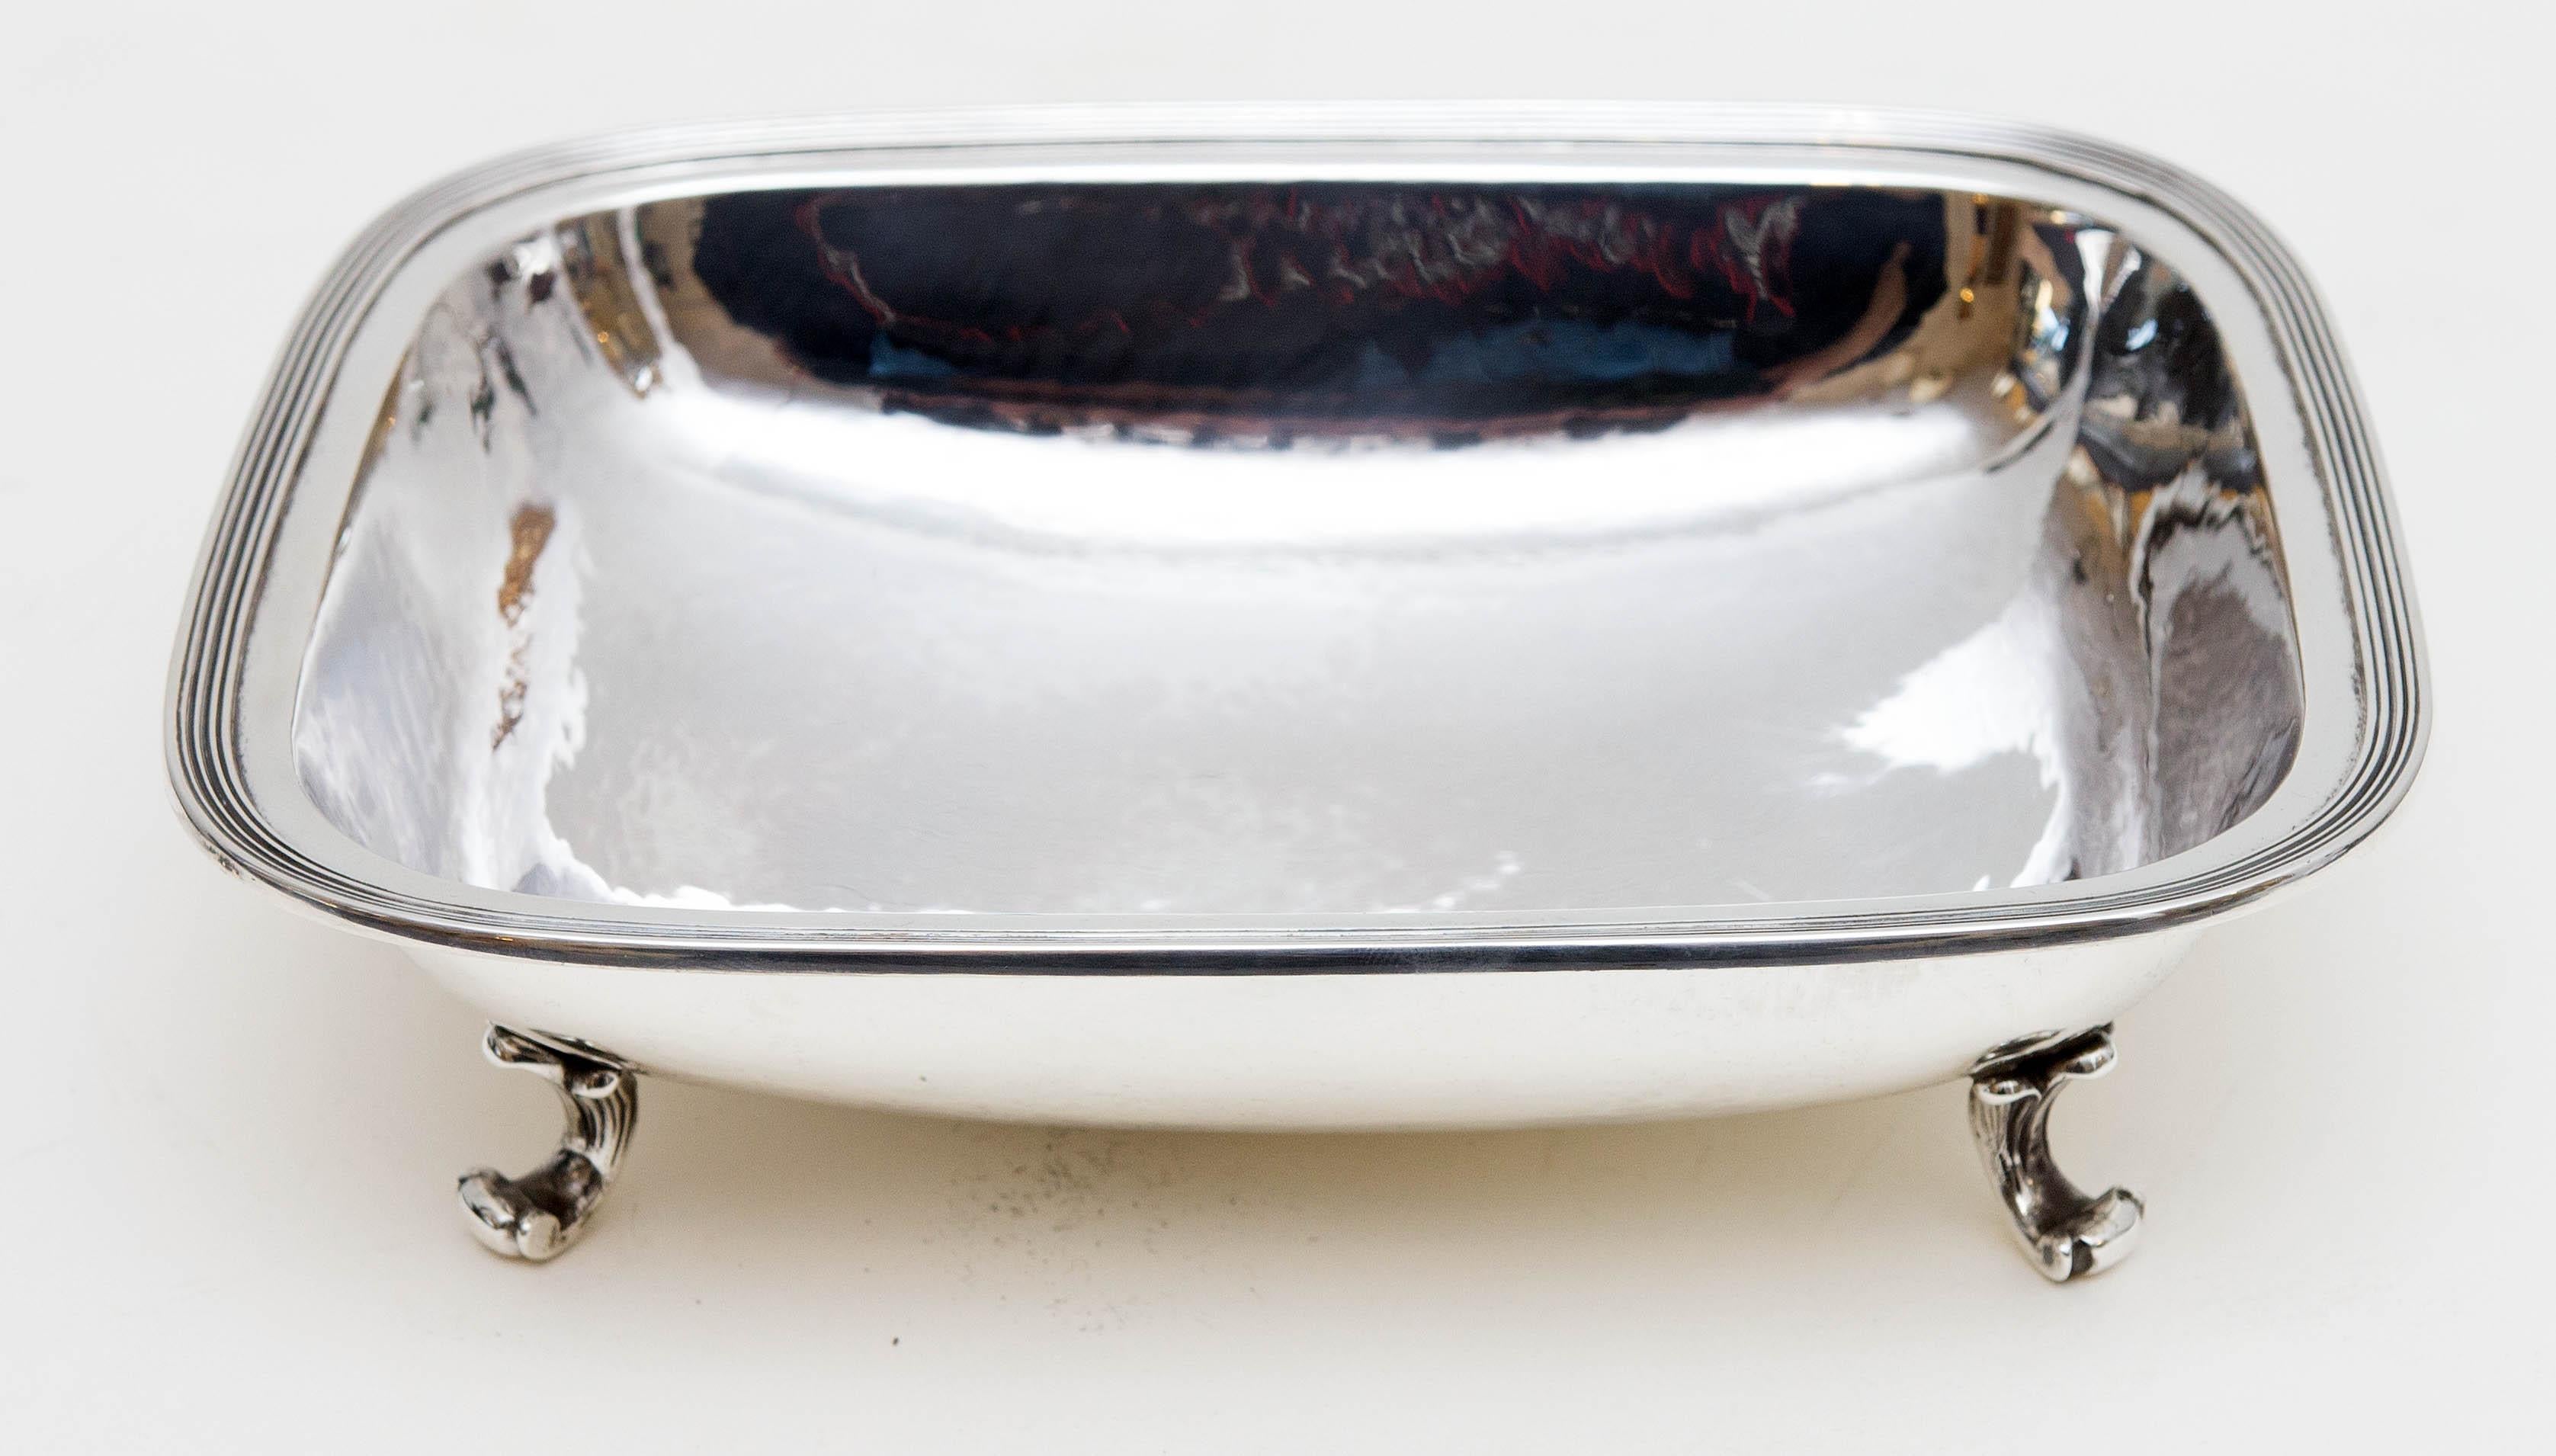 Mario Buccellati hand formed sterling footed bowl, mid-20th century. Measure: 9